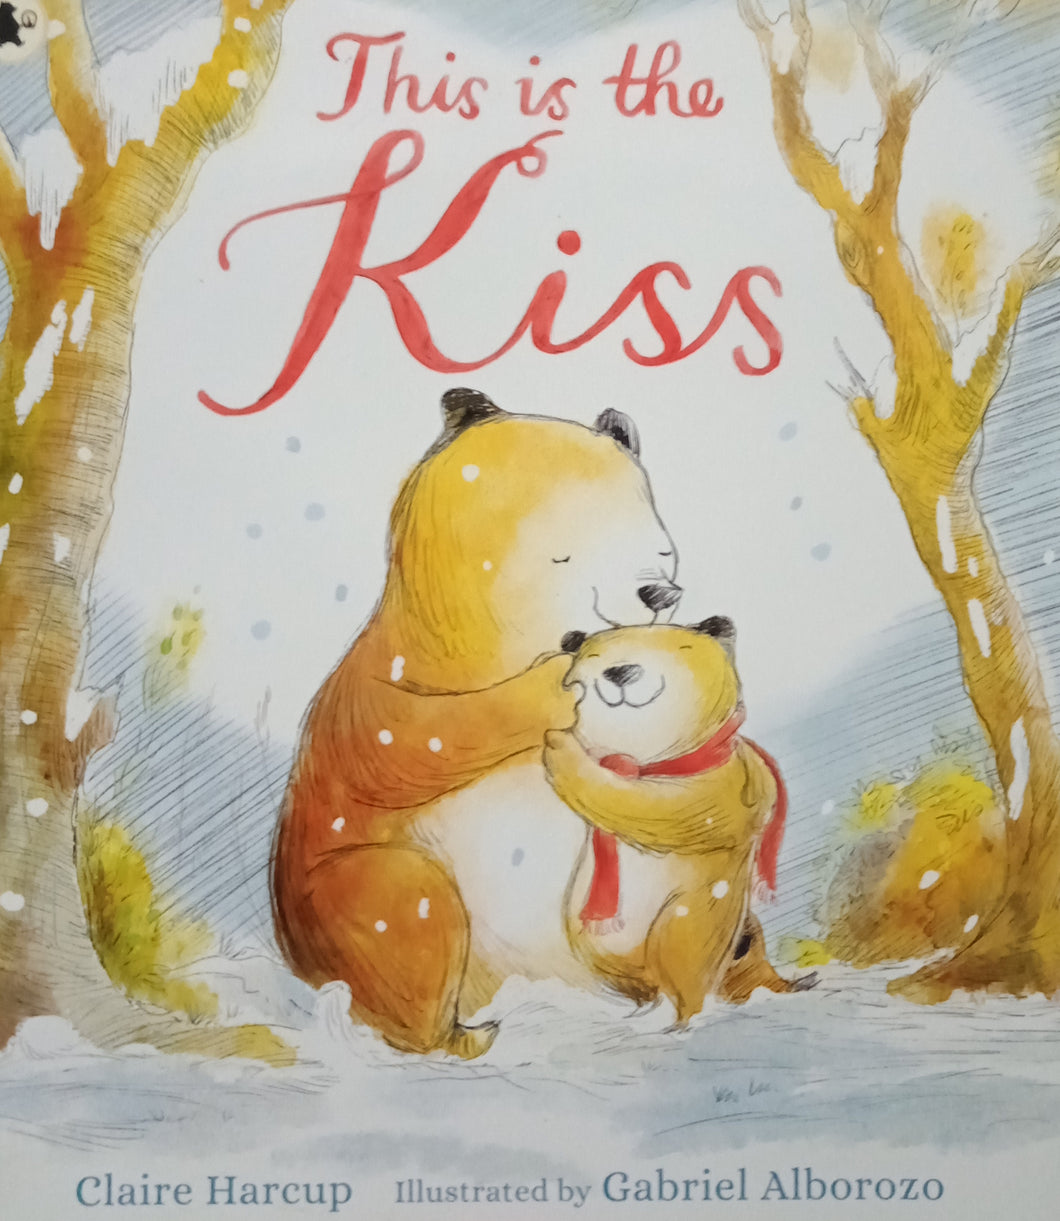 This Is The Kiss by Claire Harcup